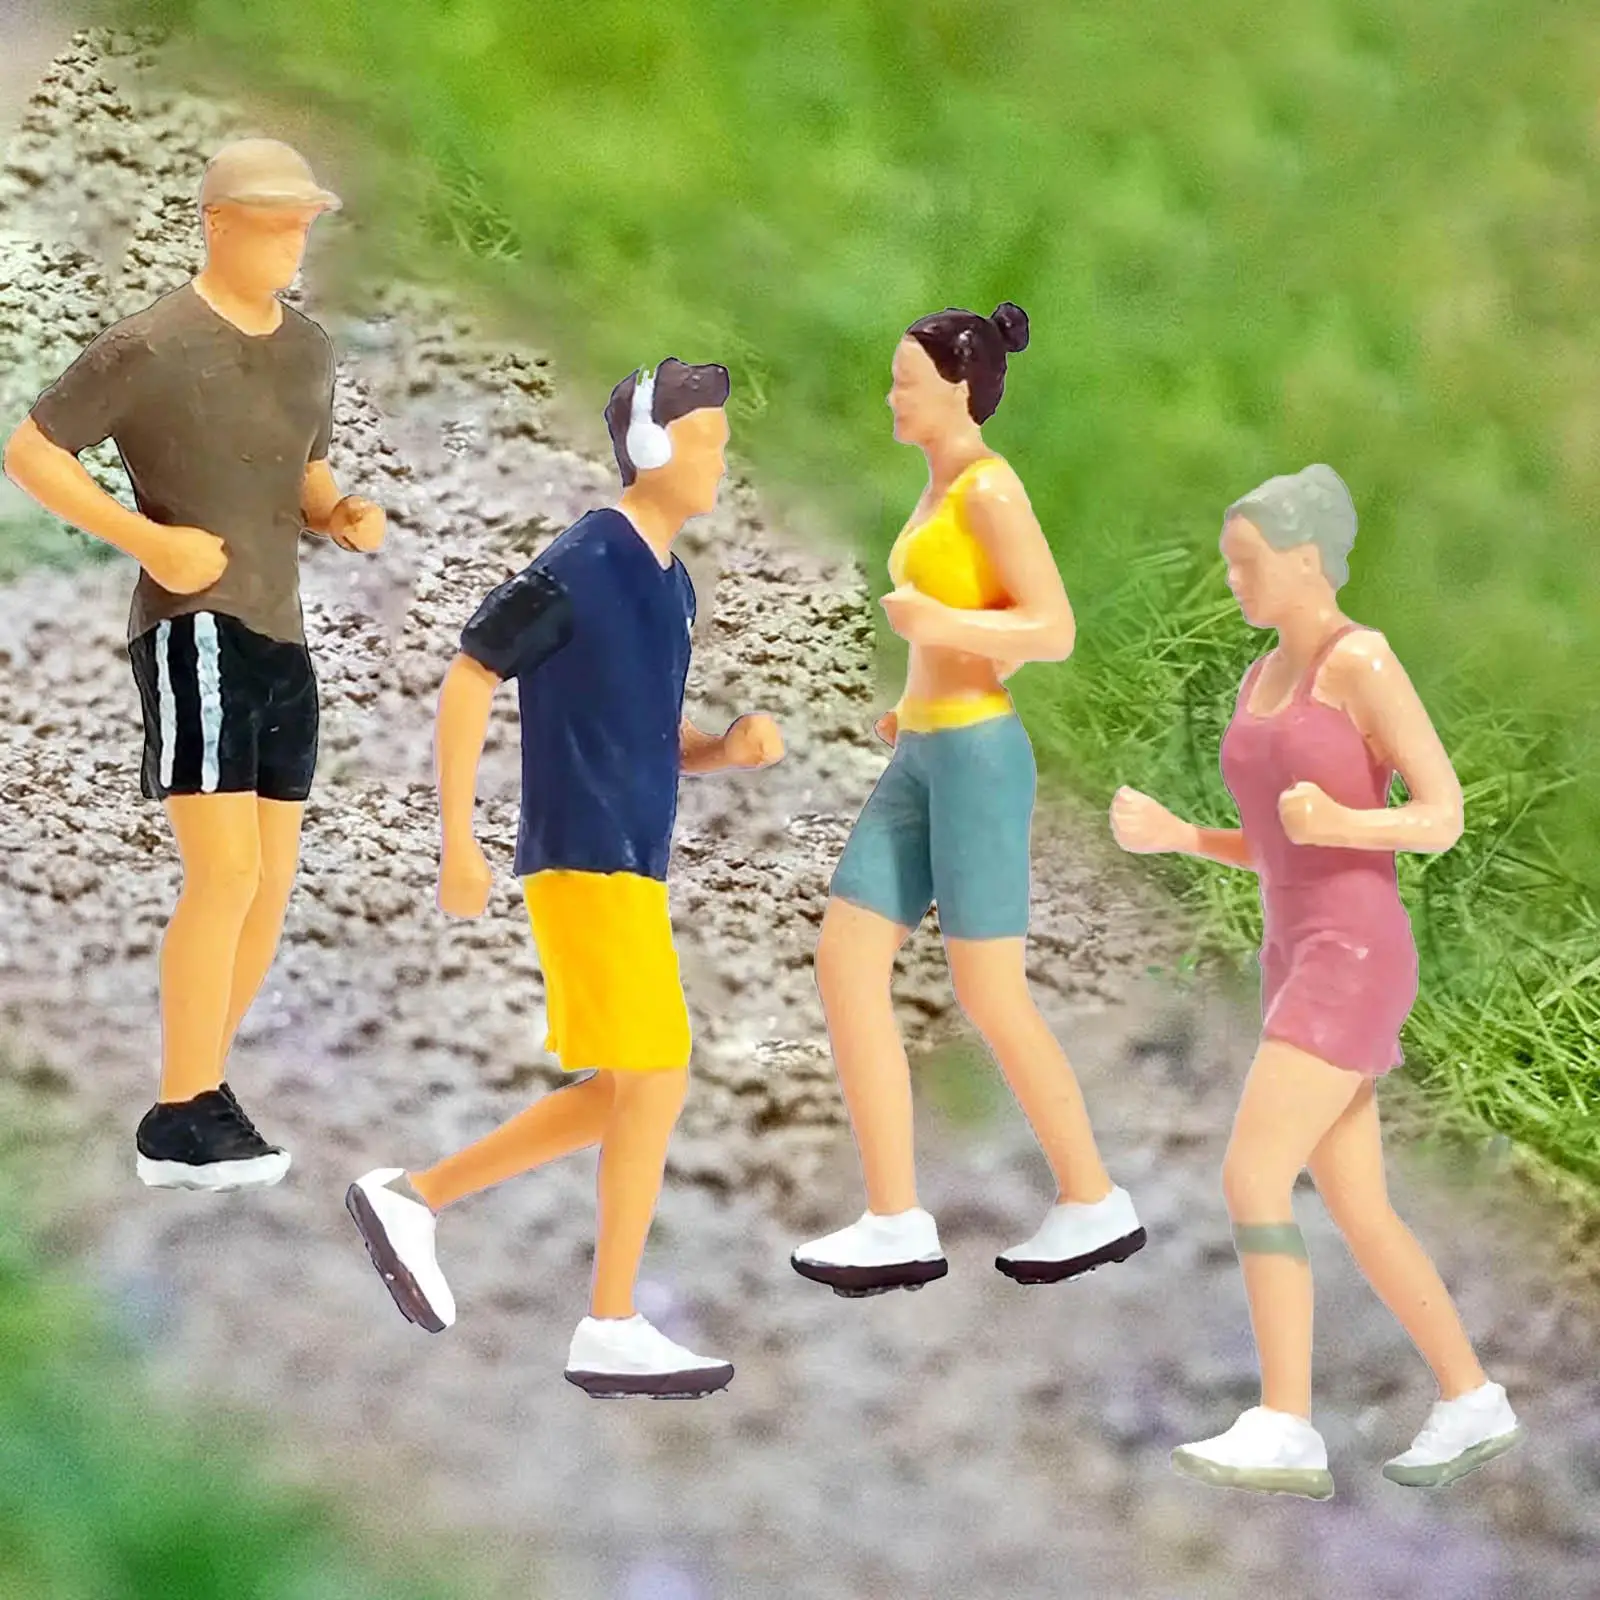 Sport Resin Figures of People Decor 1:87 Miniature Painted Figure Outdoor 1:87 Figures for Station Railway Layout Architectural